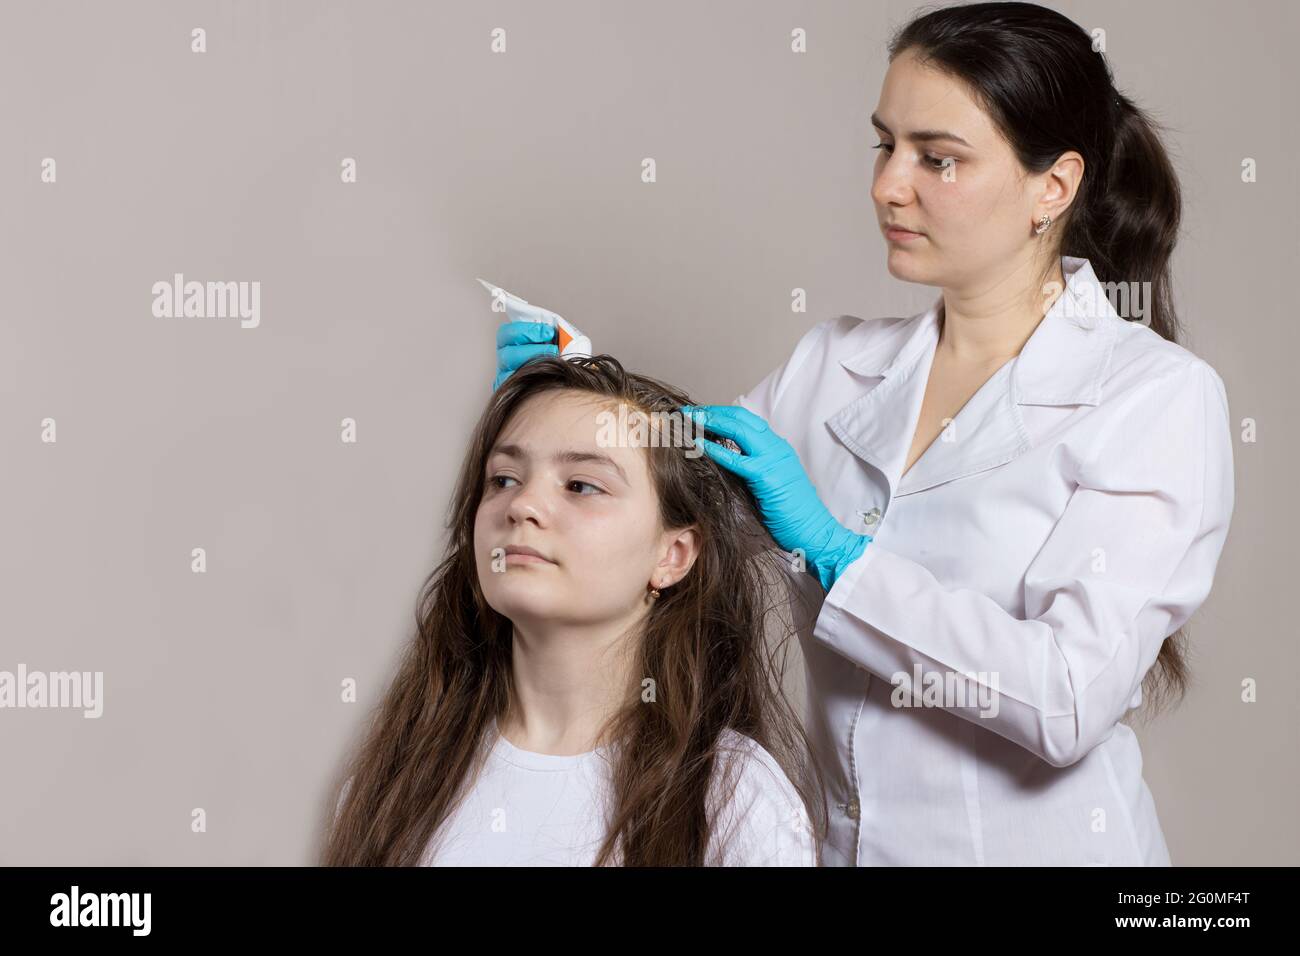 A dermatologist or trichologist applies a dandruff or lice weed to the patient's hair. Treating psoriasis, hair loss, dermatitis or head lice. Stock Photo